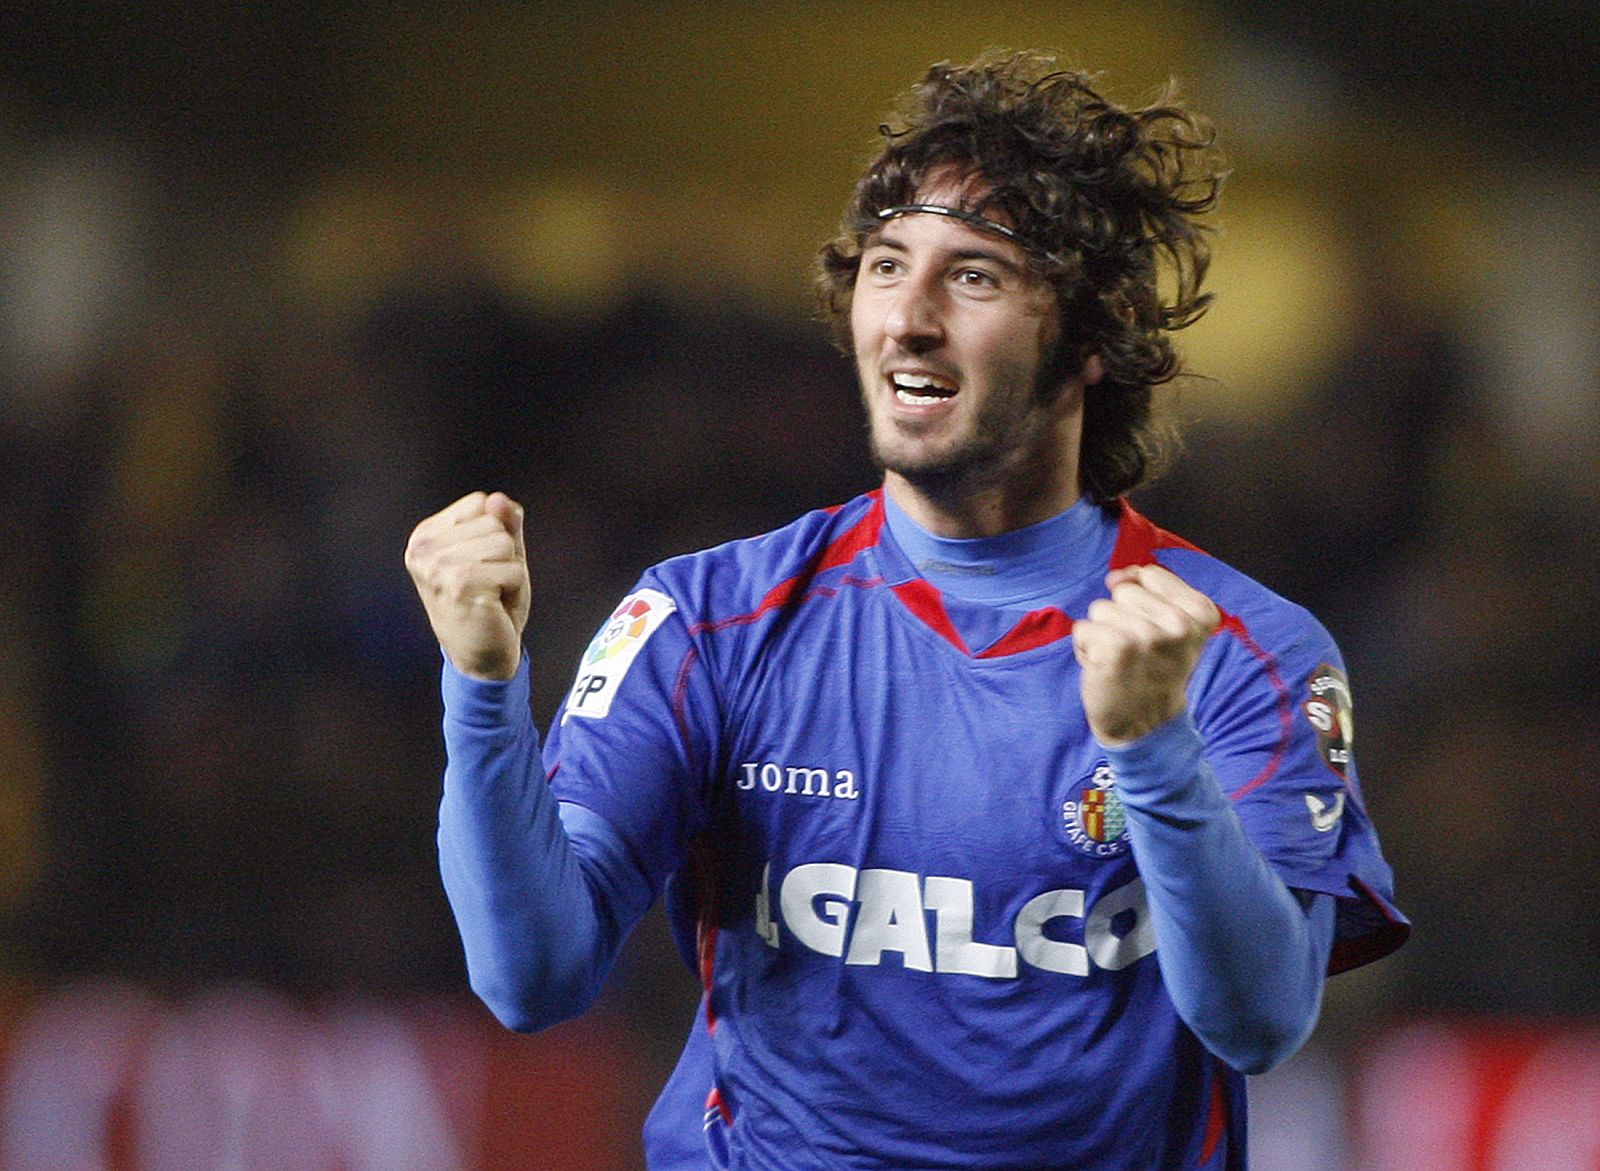 Granero celebrates after scoring against Villarreal during their Spanish first division soccer match in Villarreal